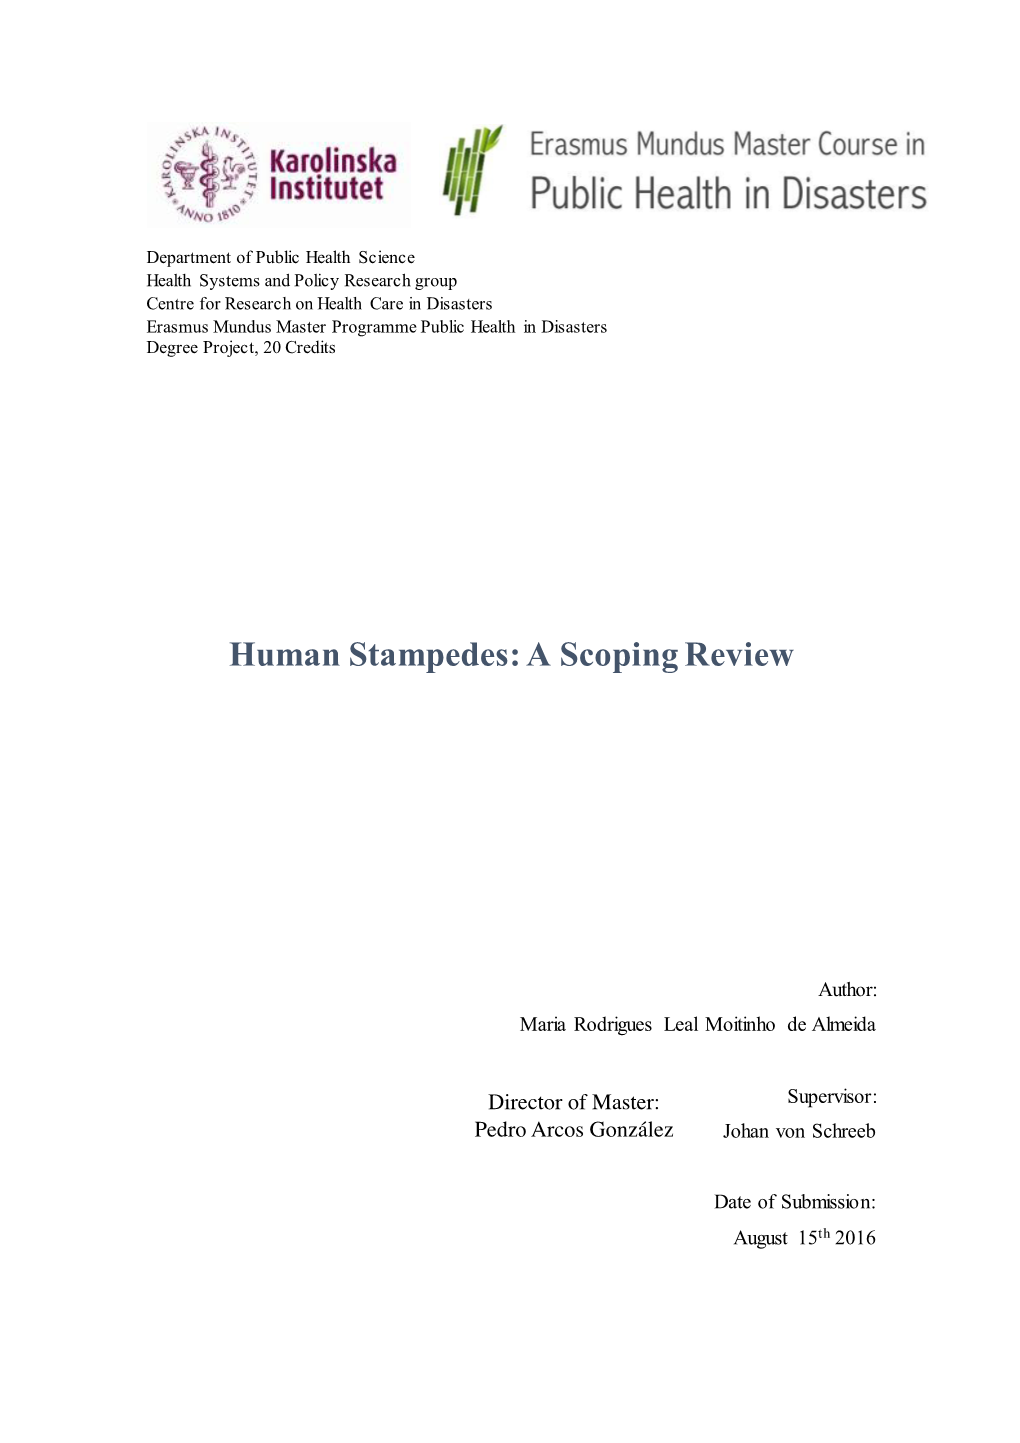 Human Stampedes: a Scoping Review